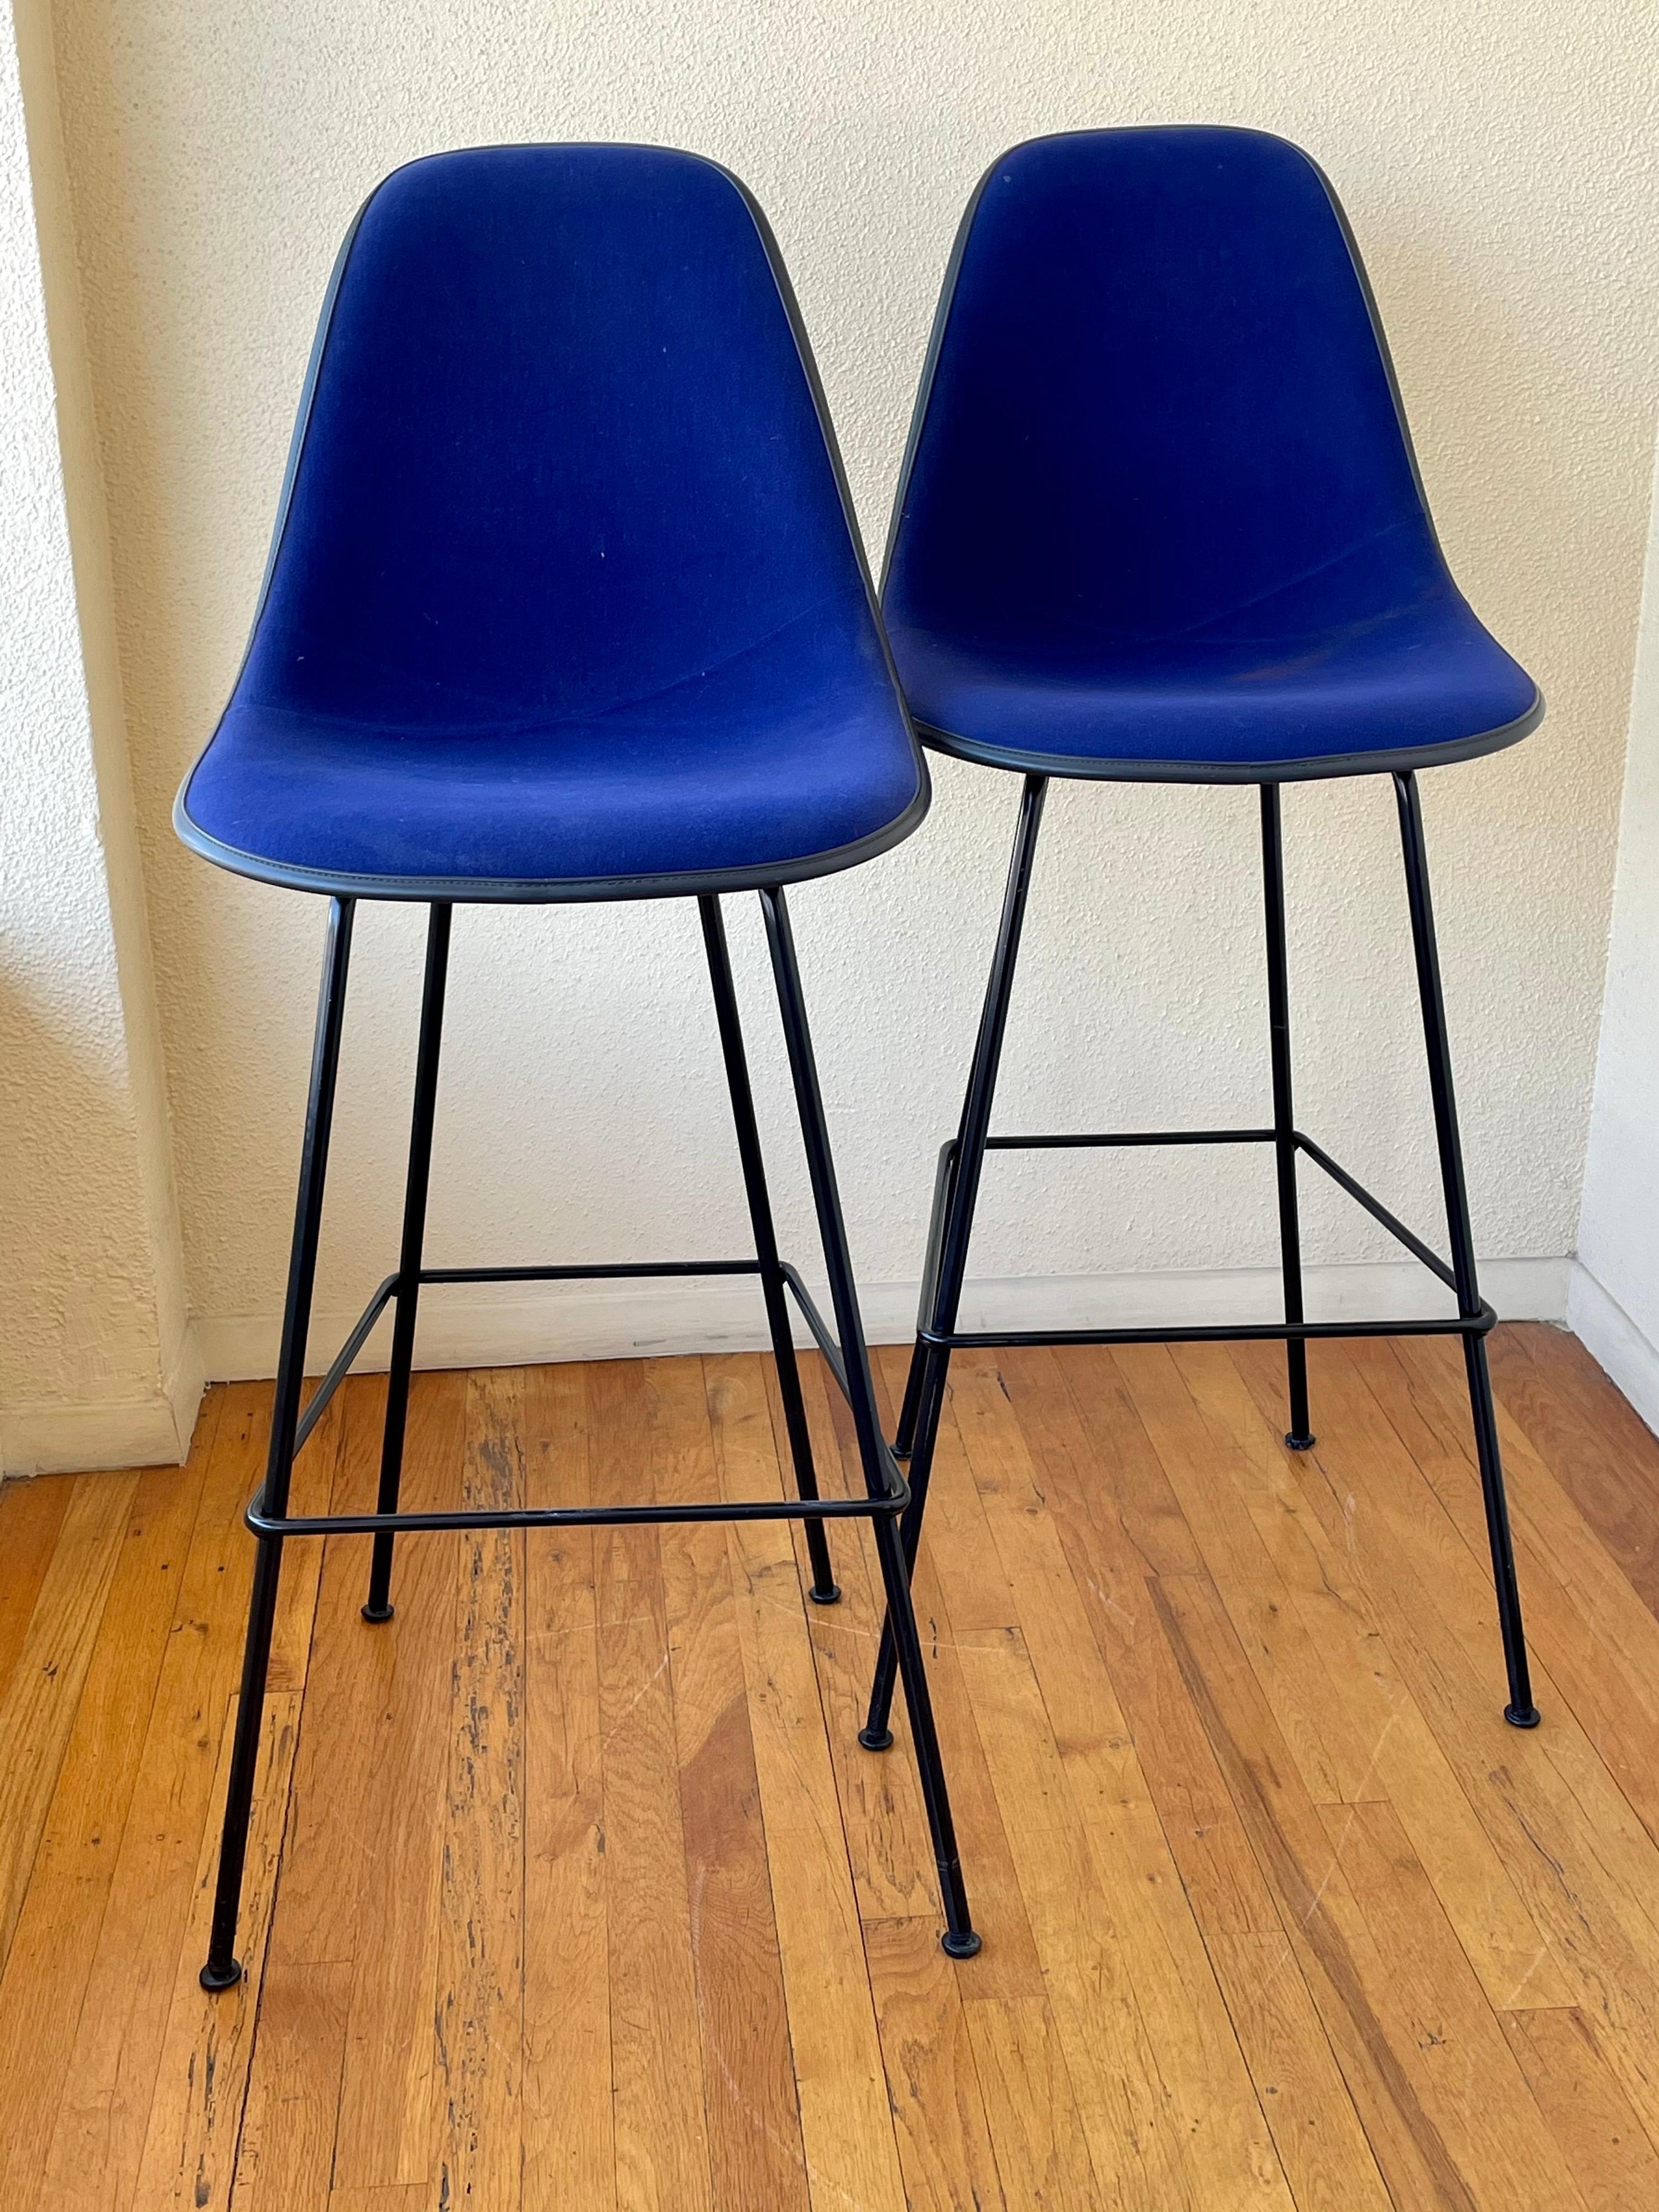 Mid-Century Modern Pair of Barstools Designed by Eames for Herman Miller with Blue Velvet Covers For Sale